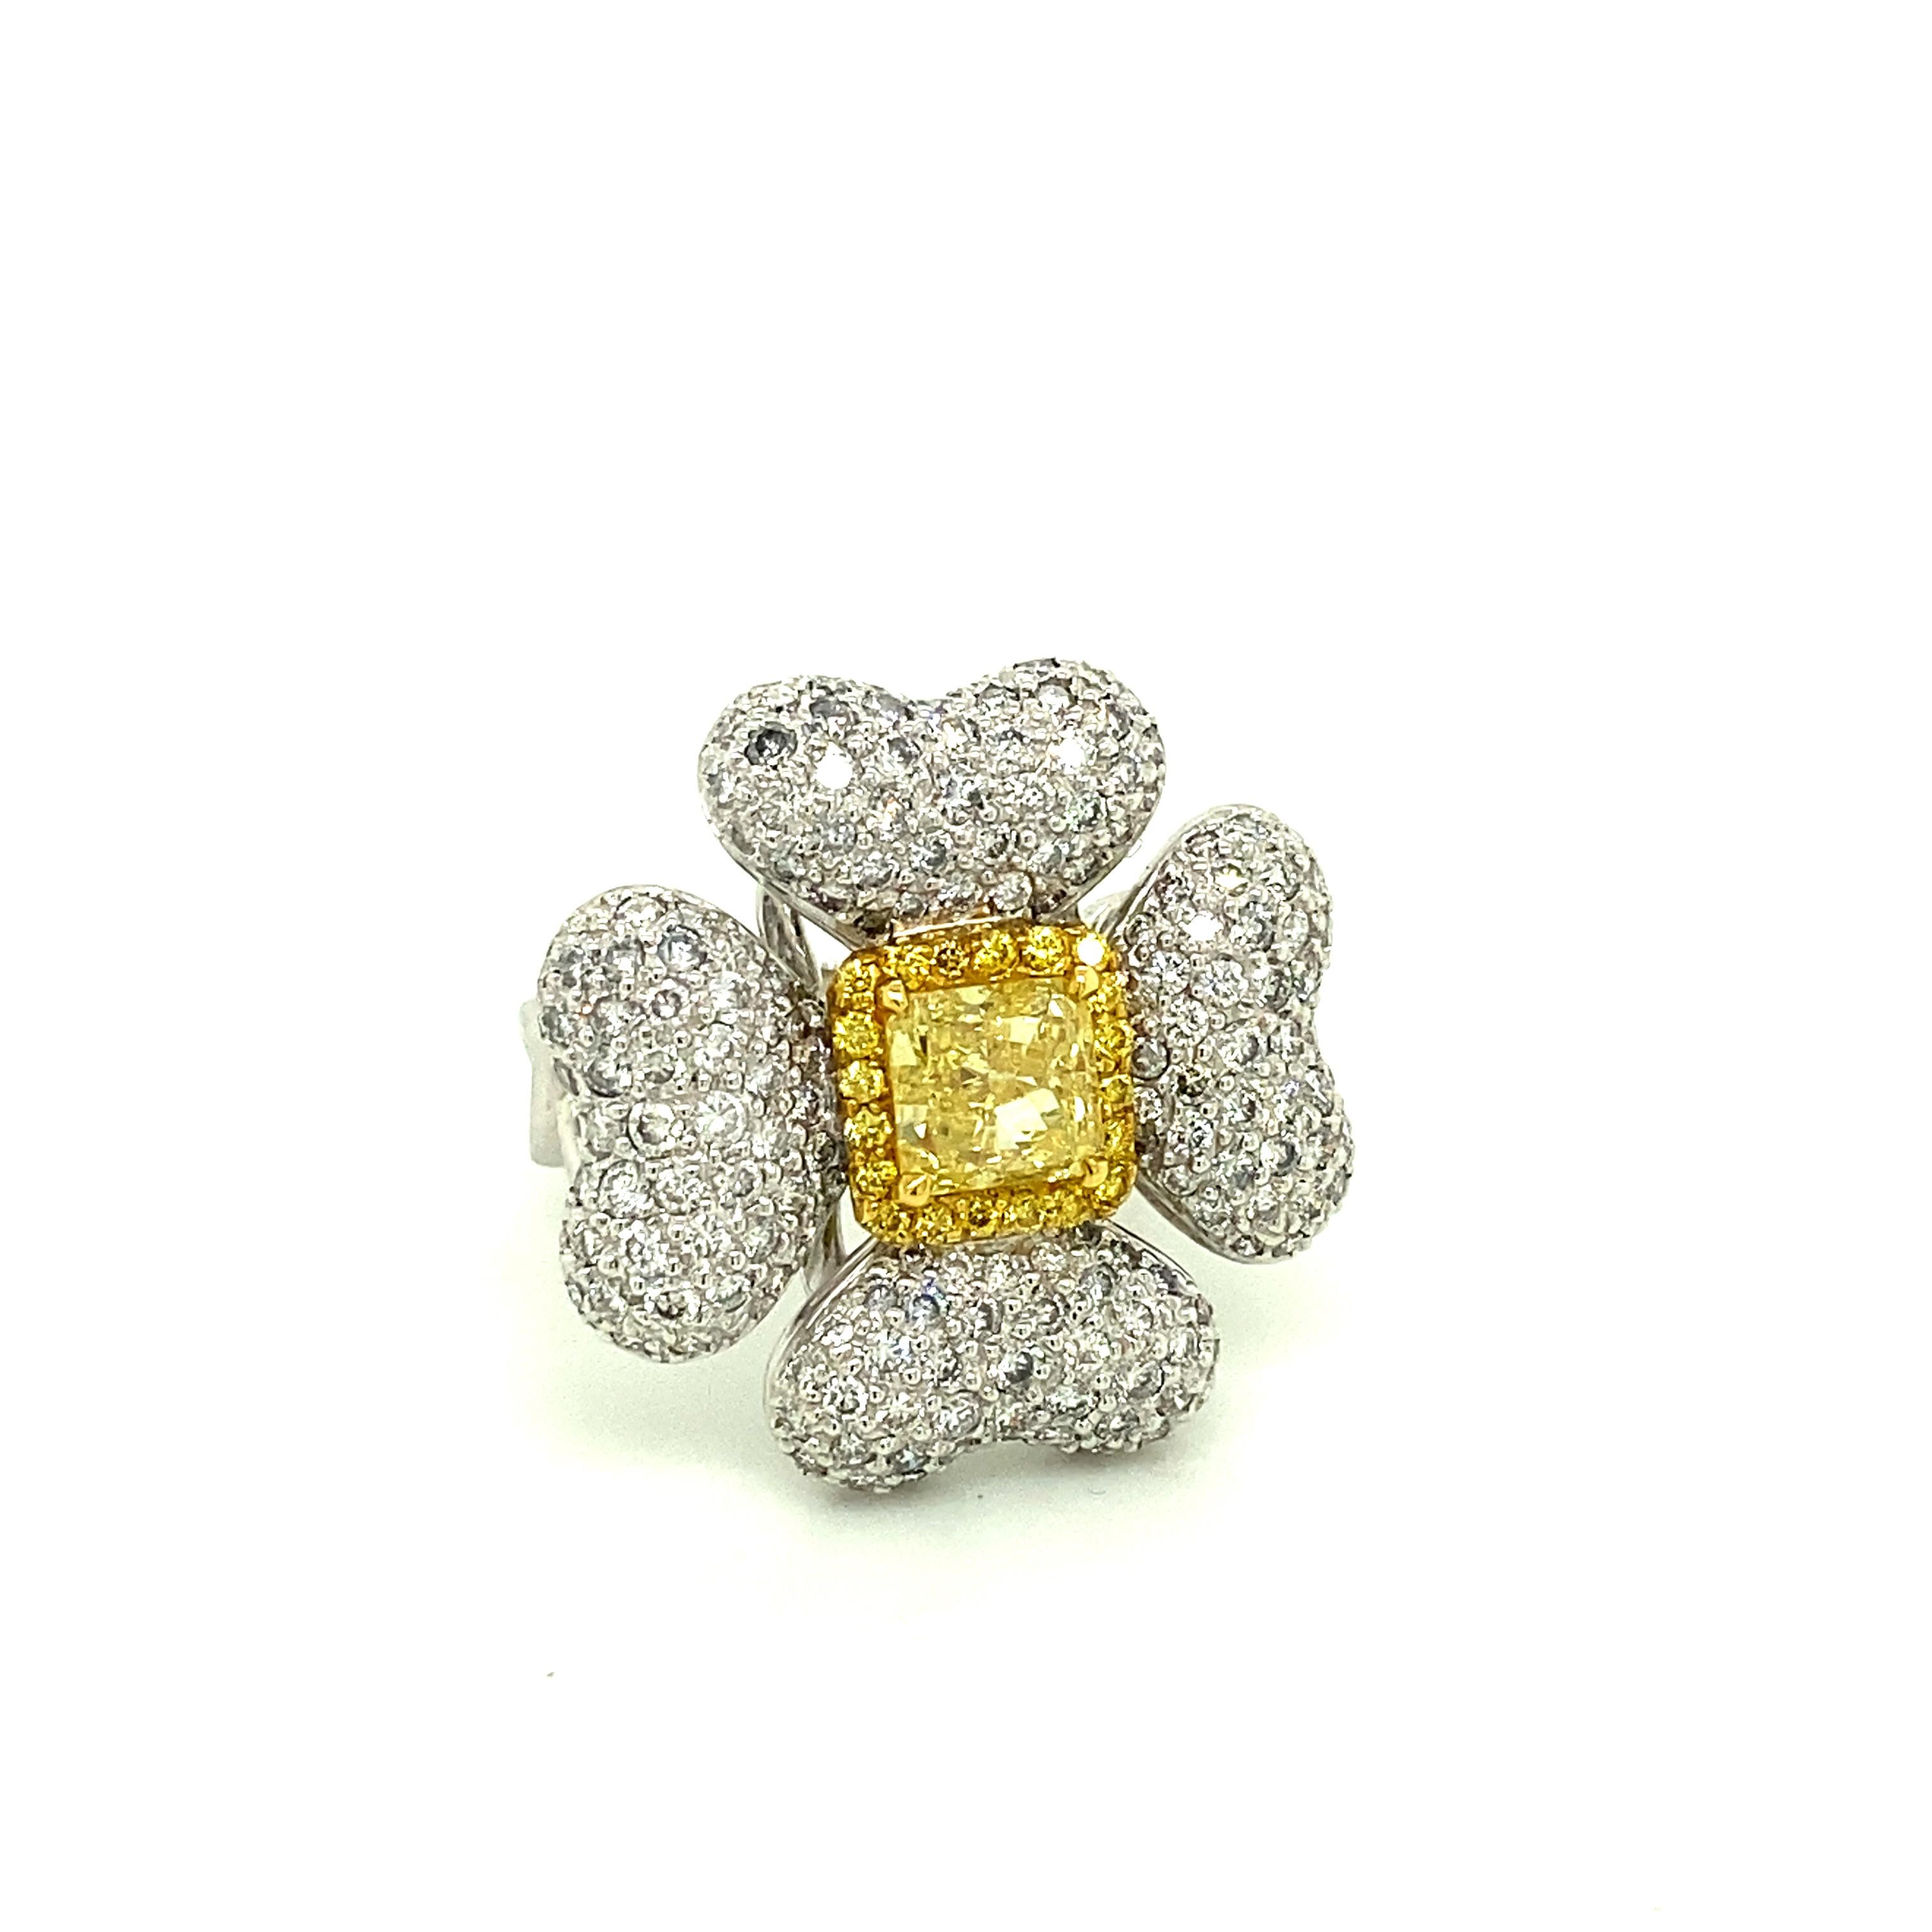 1.40 Carat GIA Certified Fancy Intense Yellow Diamond and Diamond Gold Ring:

A beautifully crafted ring, it features a 1.40 carat GIA certified fancy intense yellow diamond at the centre surrounded by a halo of yellow round brilliant diamonds, 